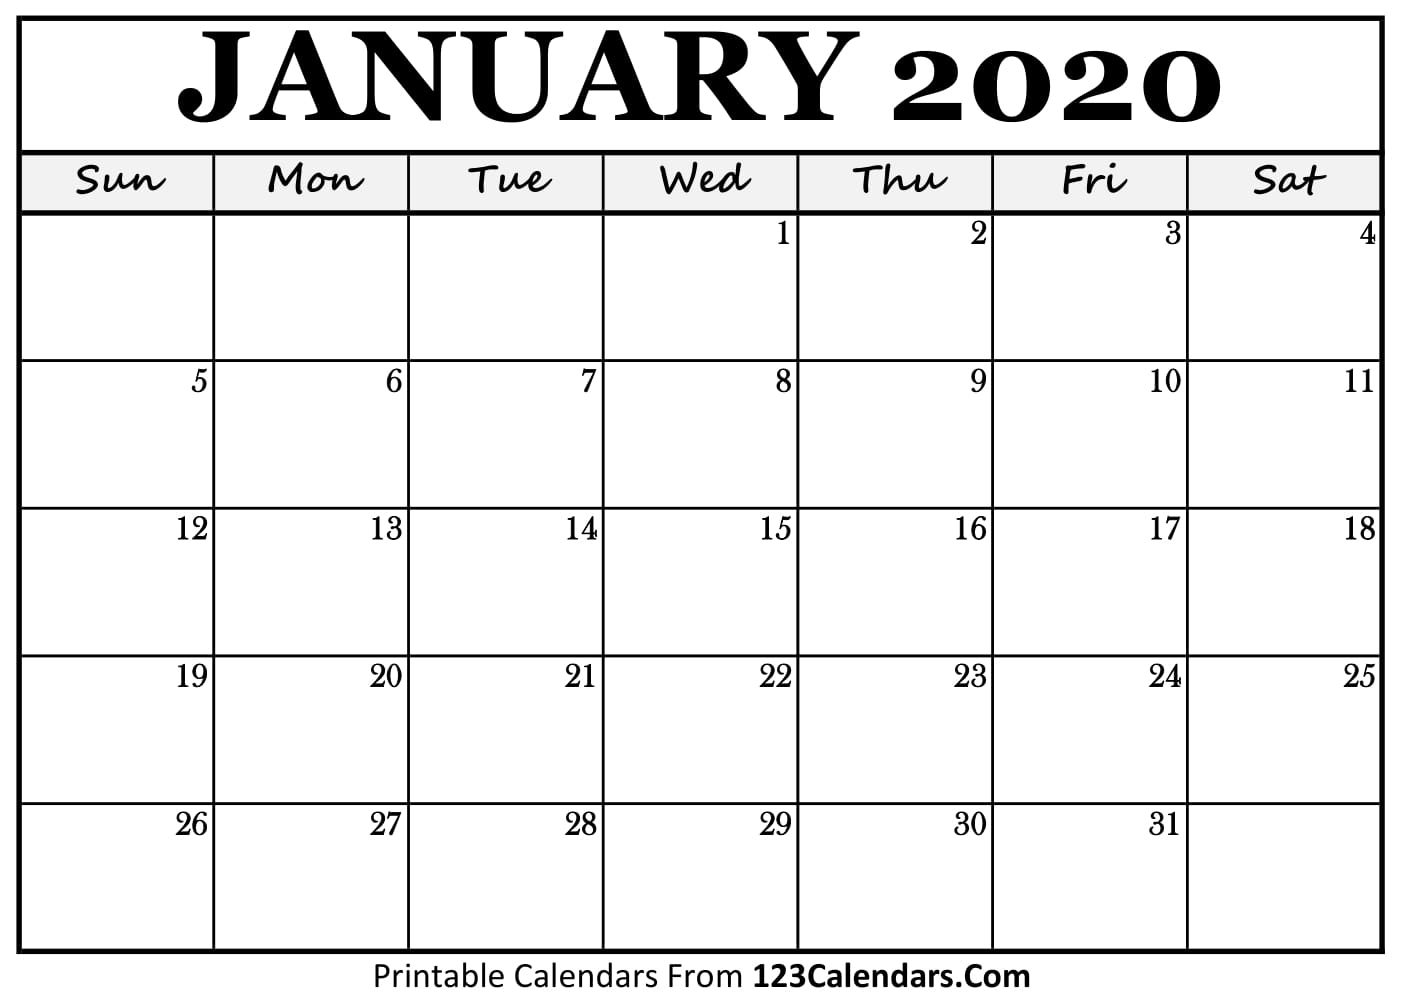 January 2020 Calendars Page - Togo.wpart.co